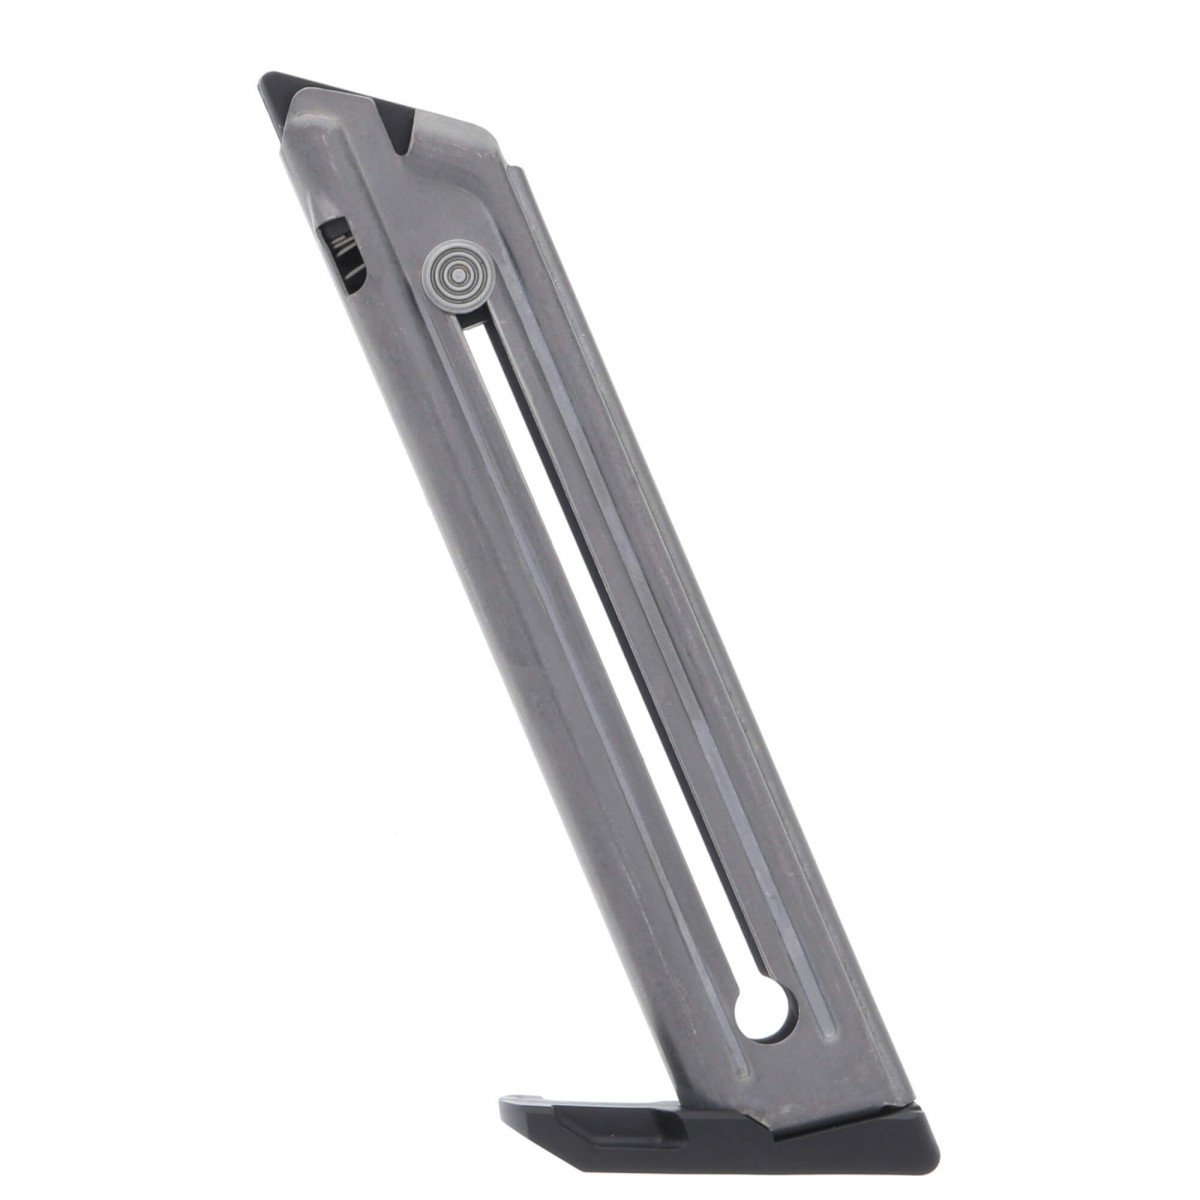 Ruger Mark IV Magazine For Sale | In Stock Now, Don't Miss Out! - Tactical Firearms And Archery